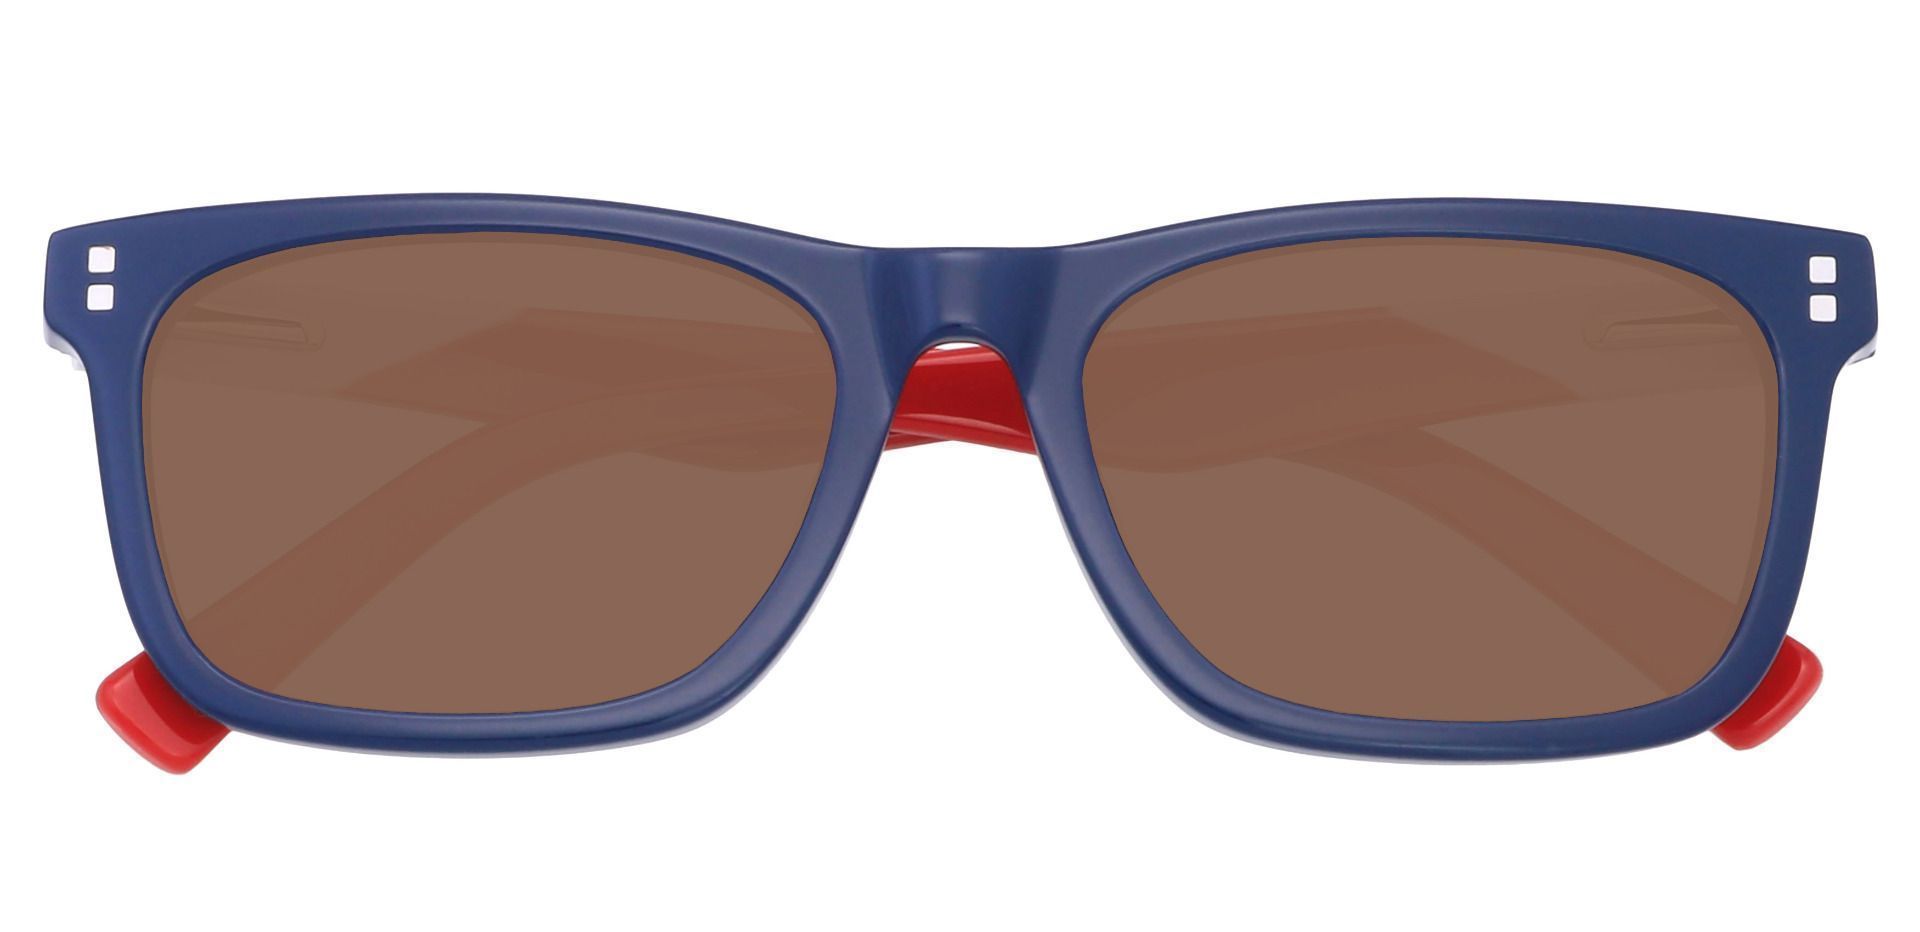 Harbor Rectangle Reading Sunglasses - Blue Frame With Brown Lenses